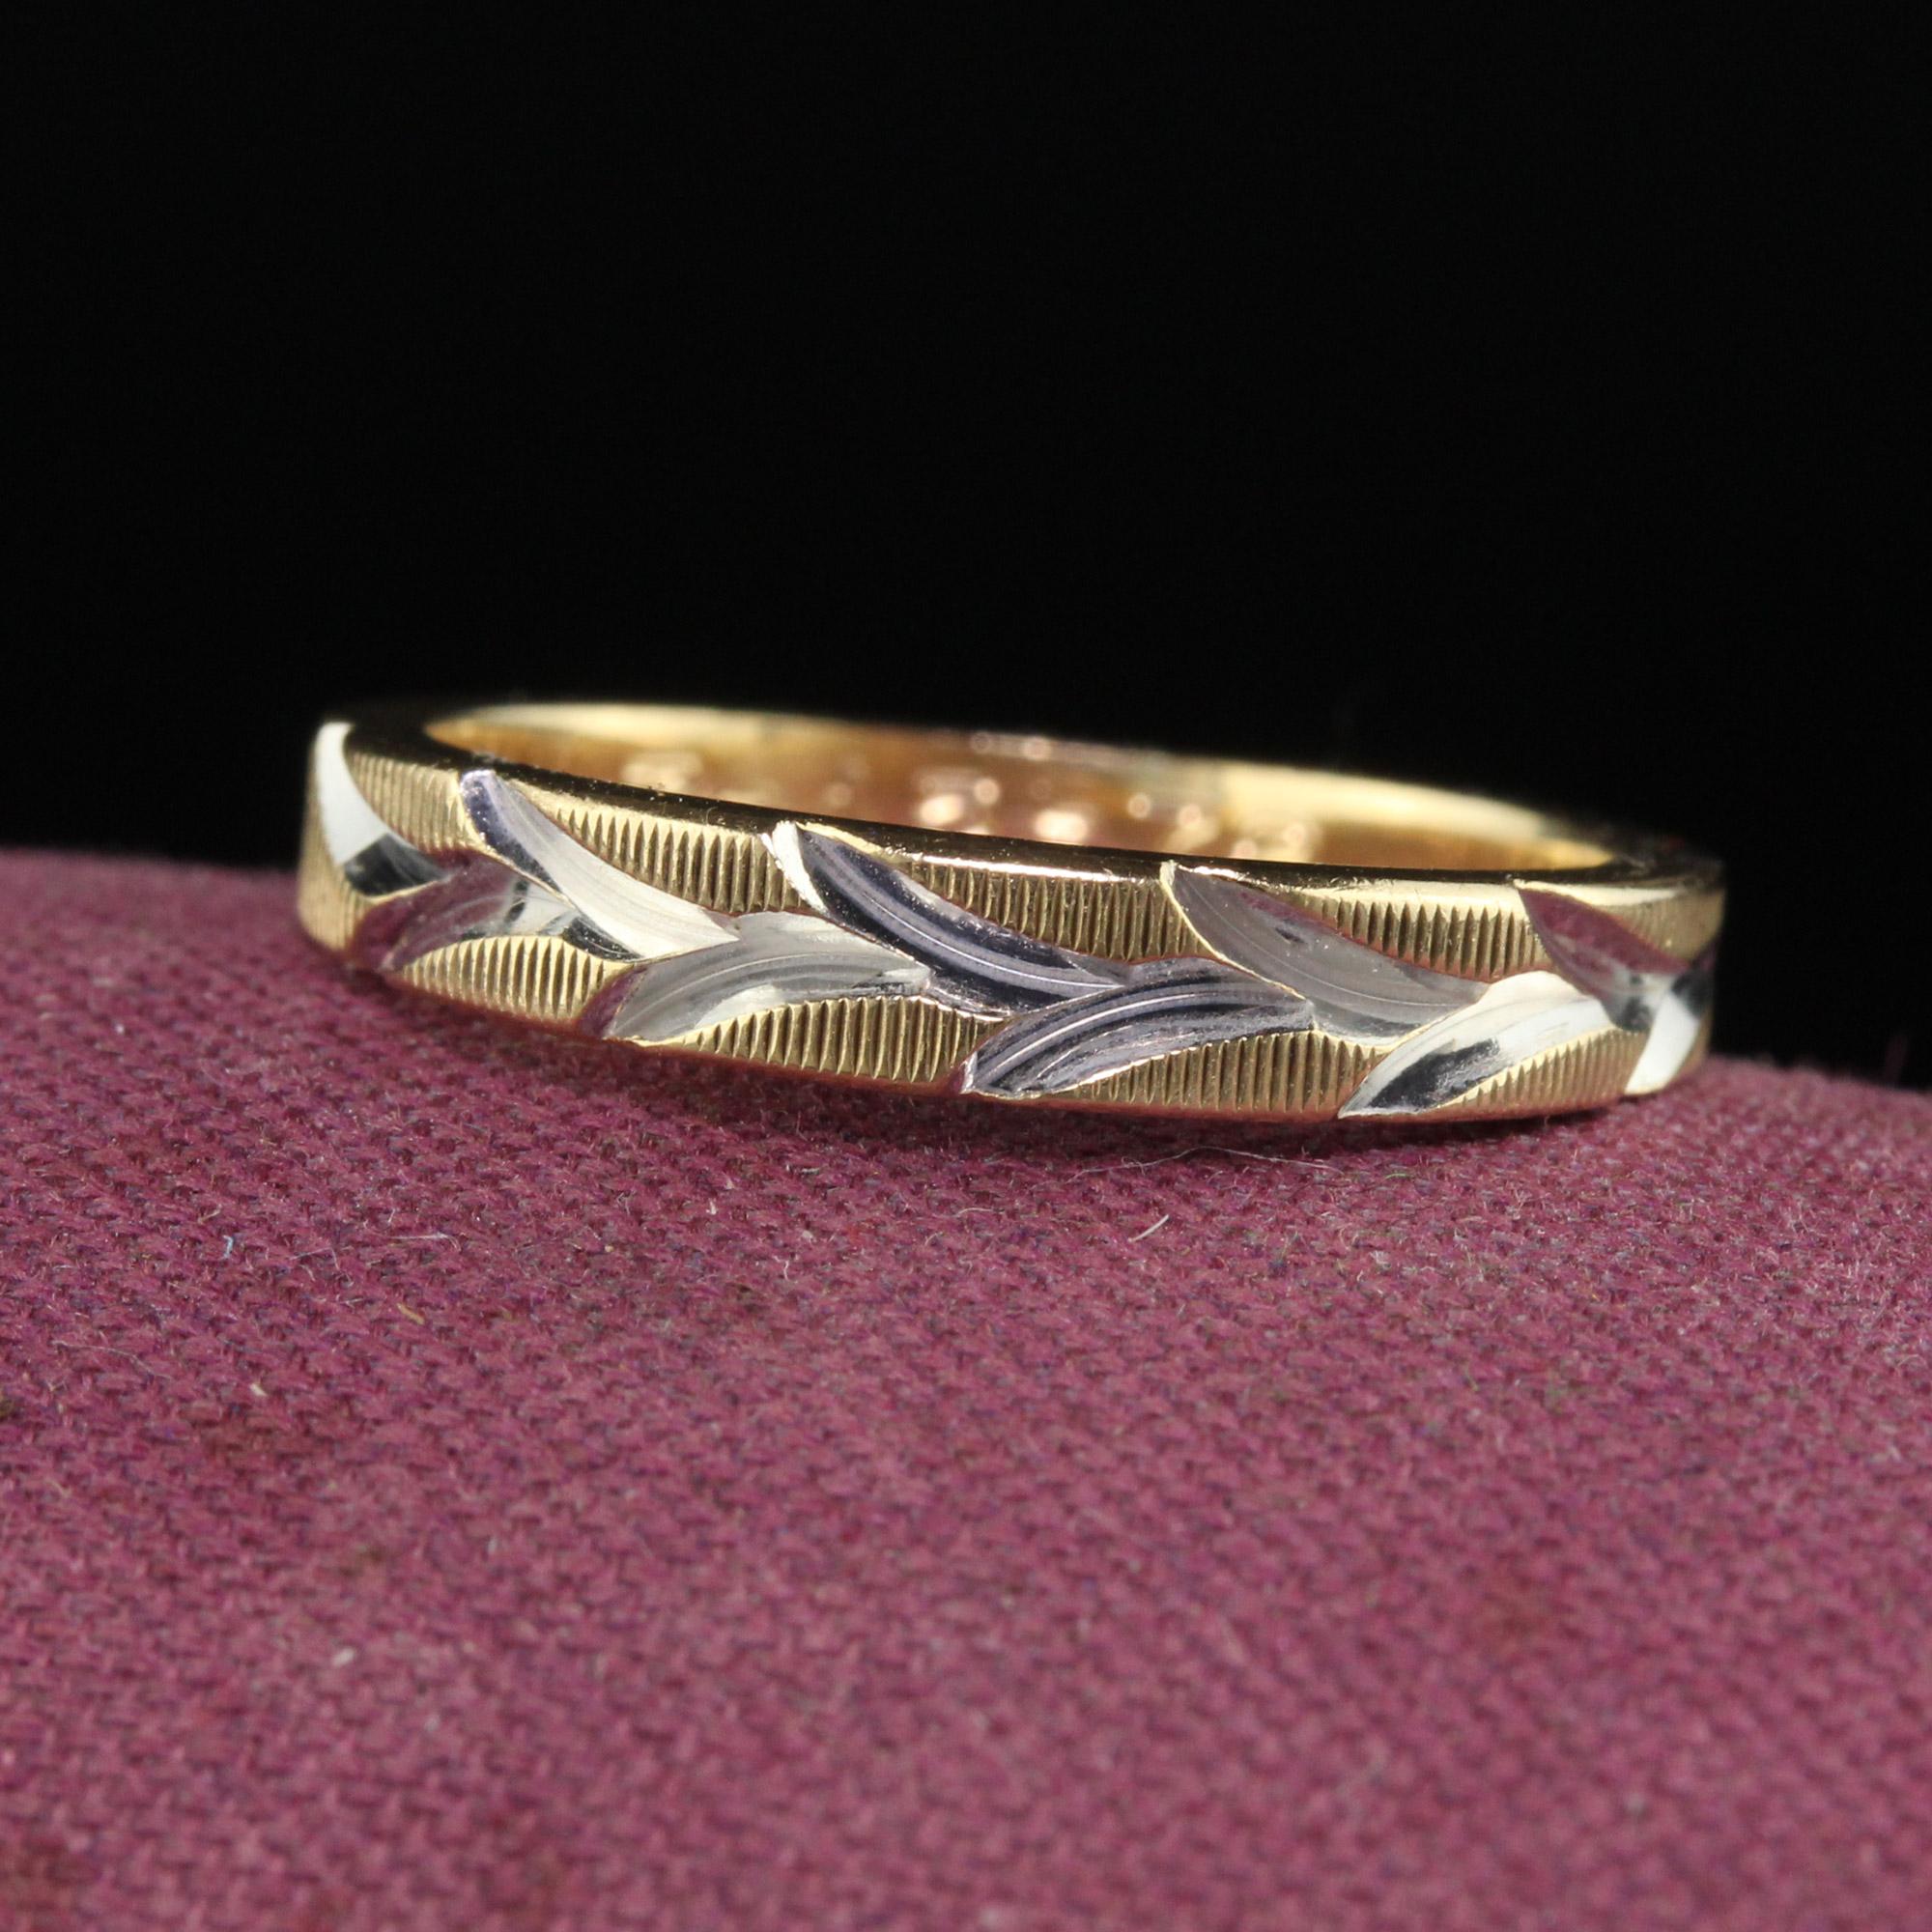 Beautiful Vintage Estate 14K Yellow Gold Two Tone Engraved Floral Wedding Band - Size 5 1/4. This beautiful wedding band is crafted in 14k yellow gold and white gold top. The ring has a deeply engraved design on top of the ring and has 